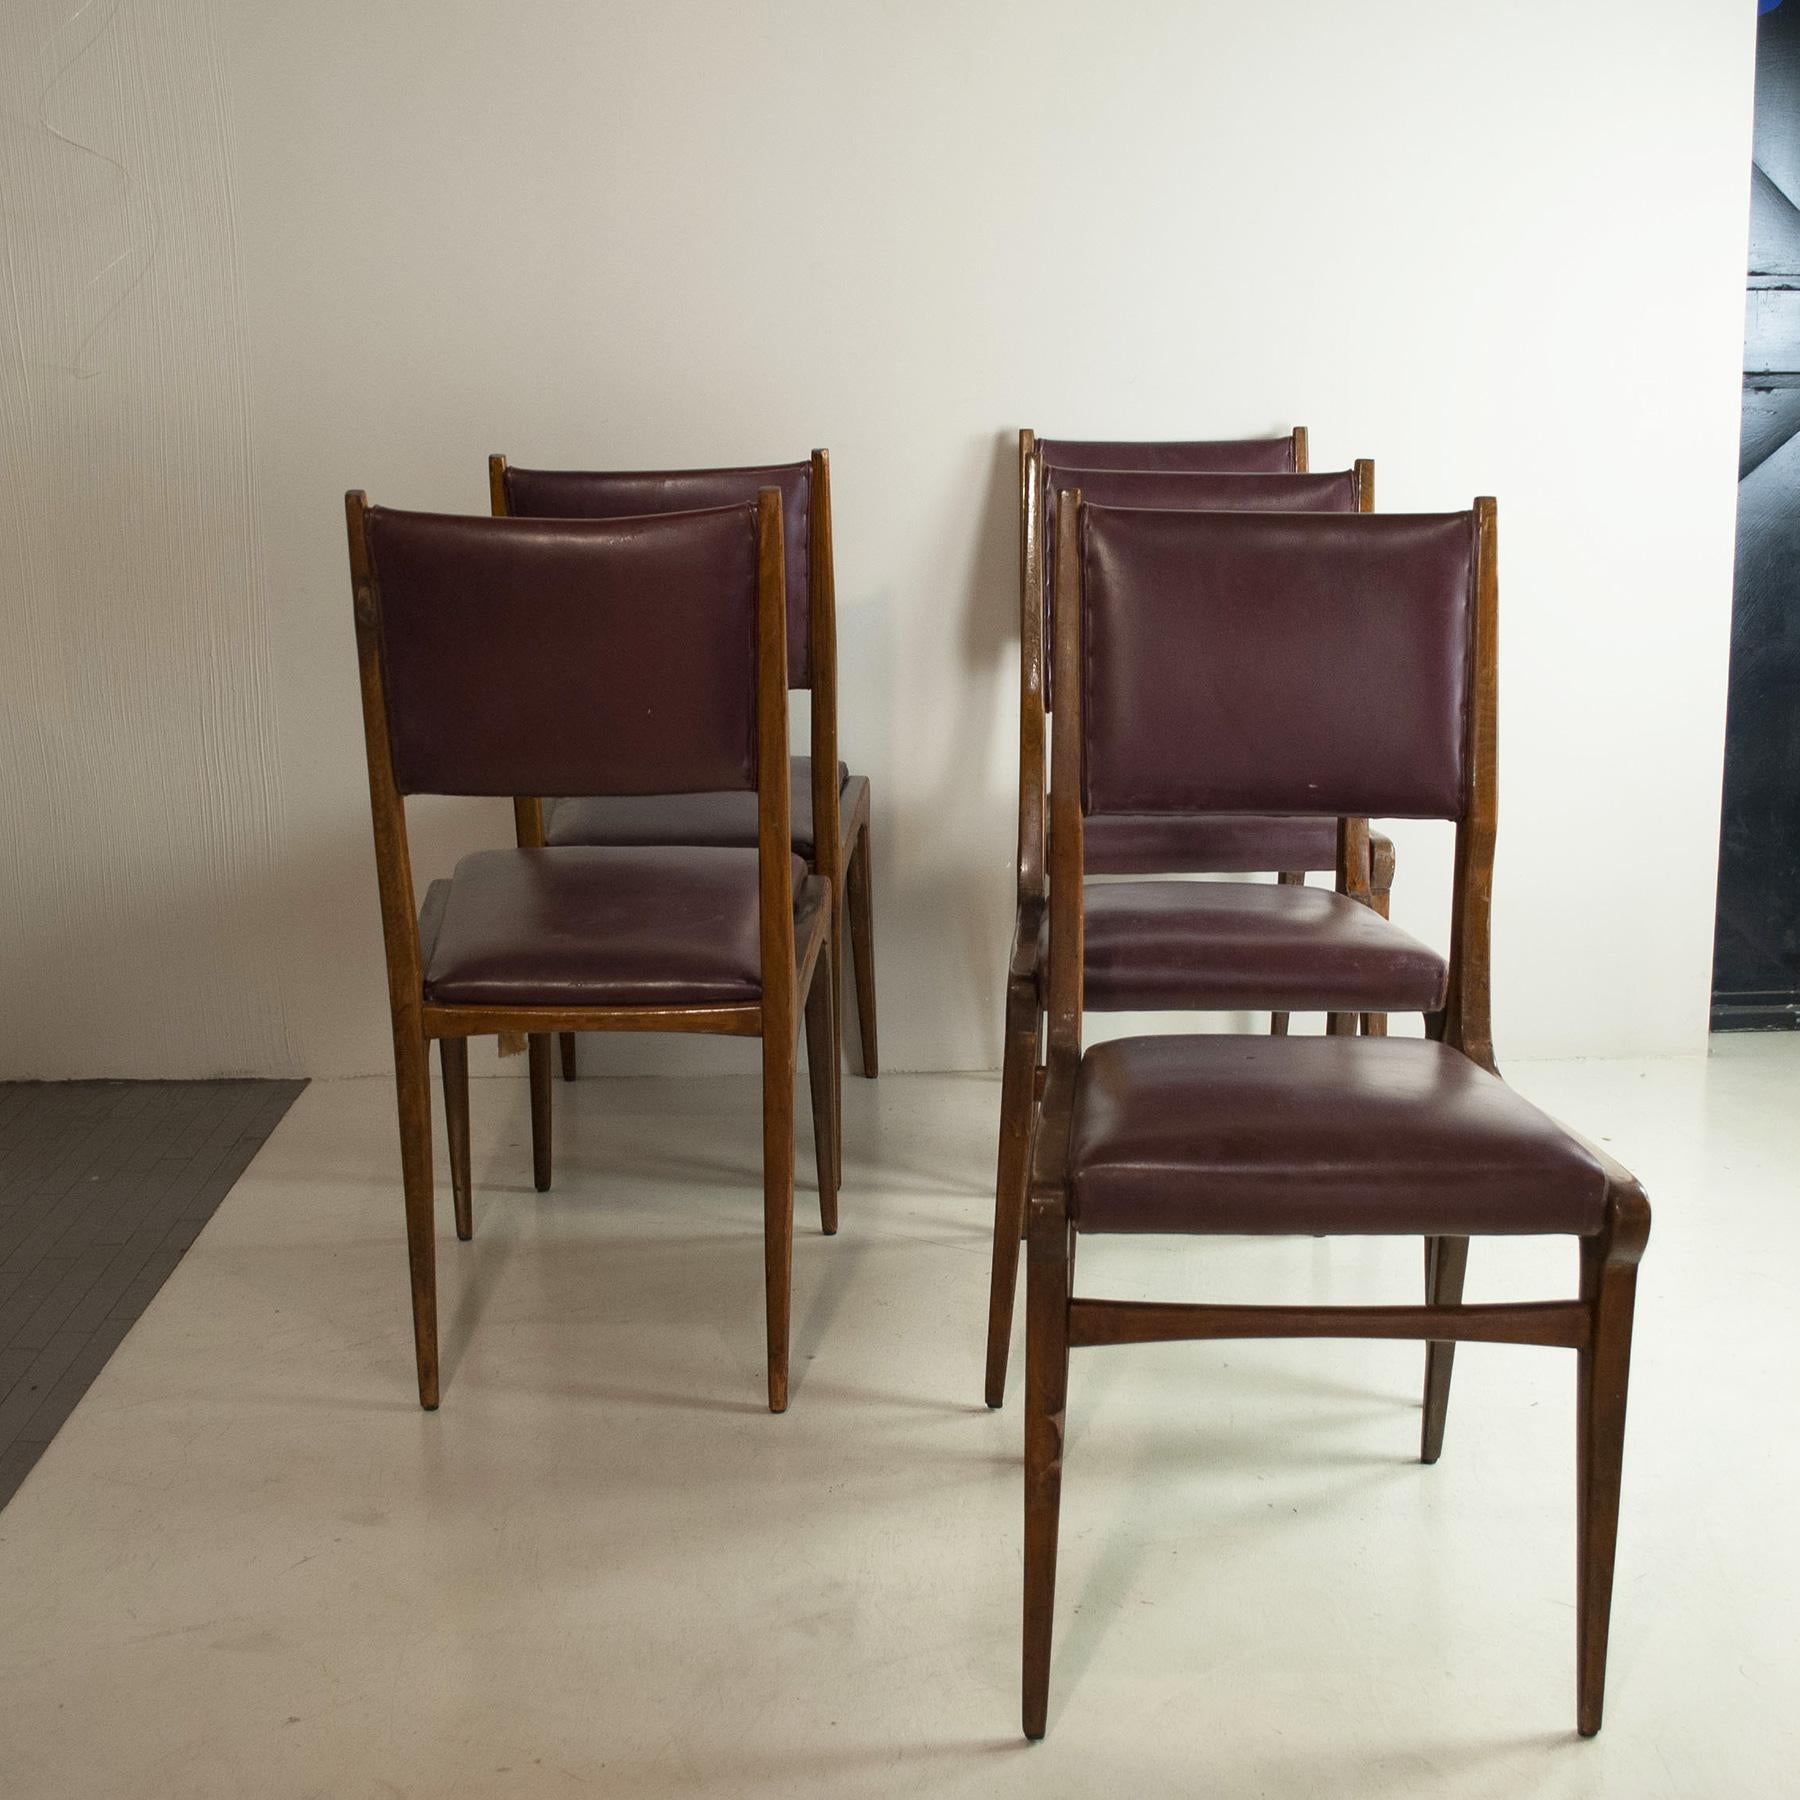 Set of five Italian chairs from the 1950s in wood and vintage faux leather, designed by Carlo De Carli at the end of the 1950s.